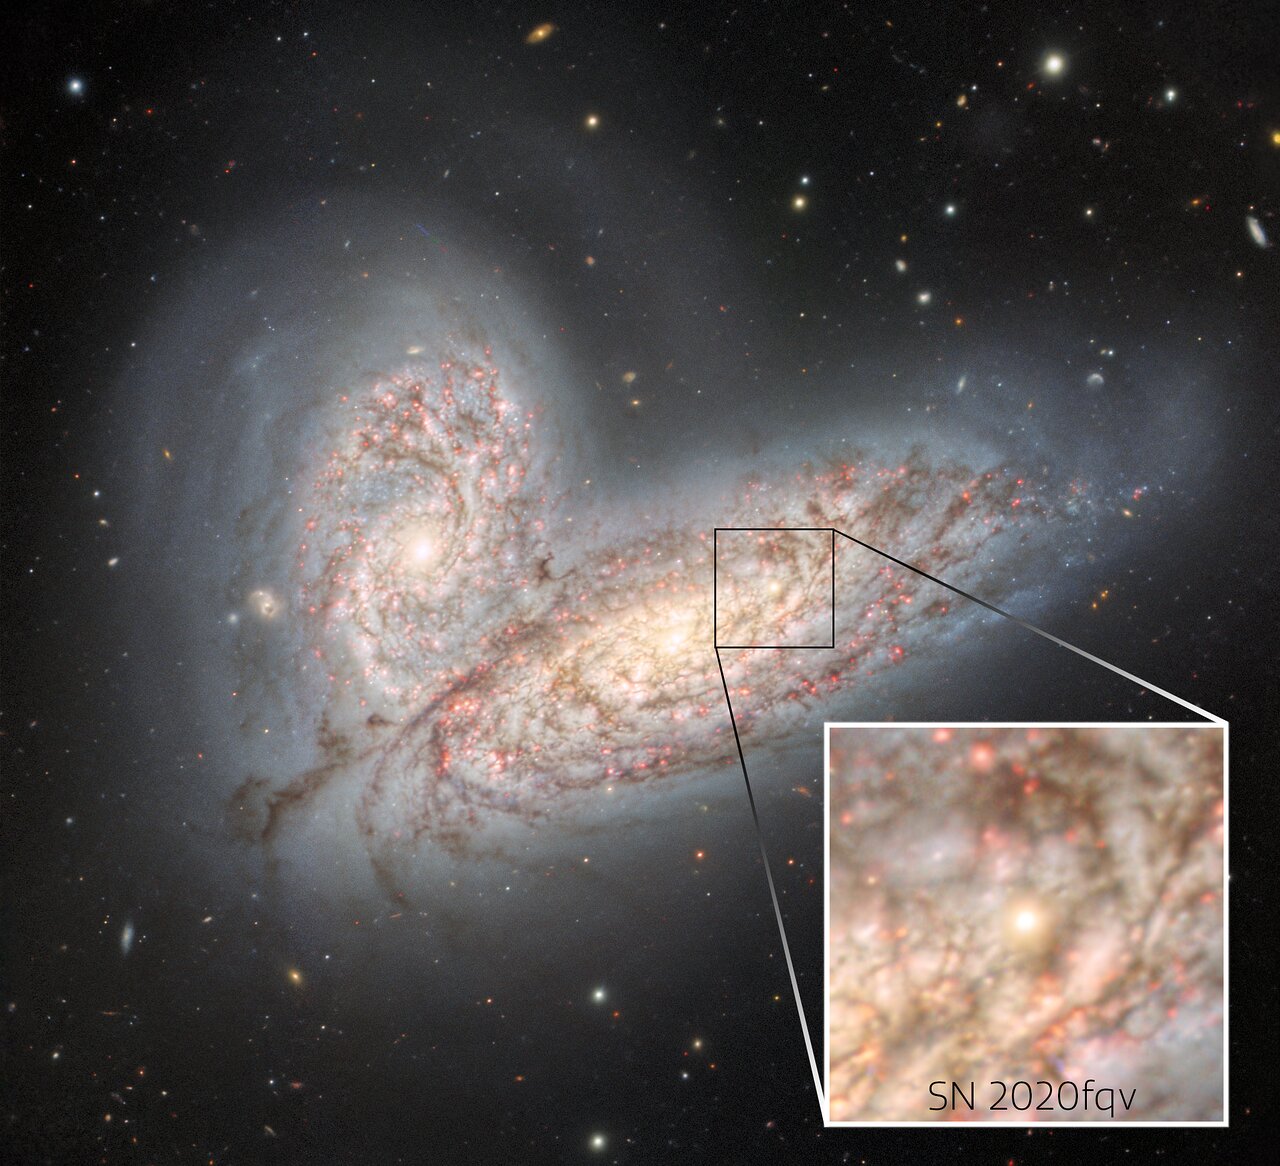 two spiral galaxies colliding